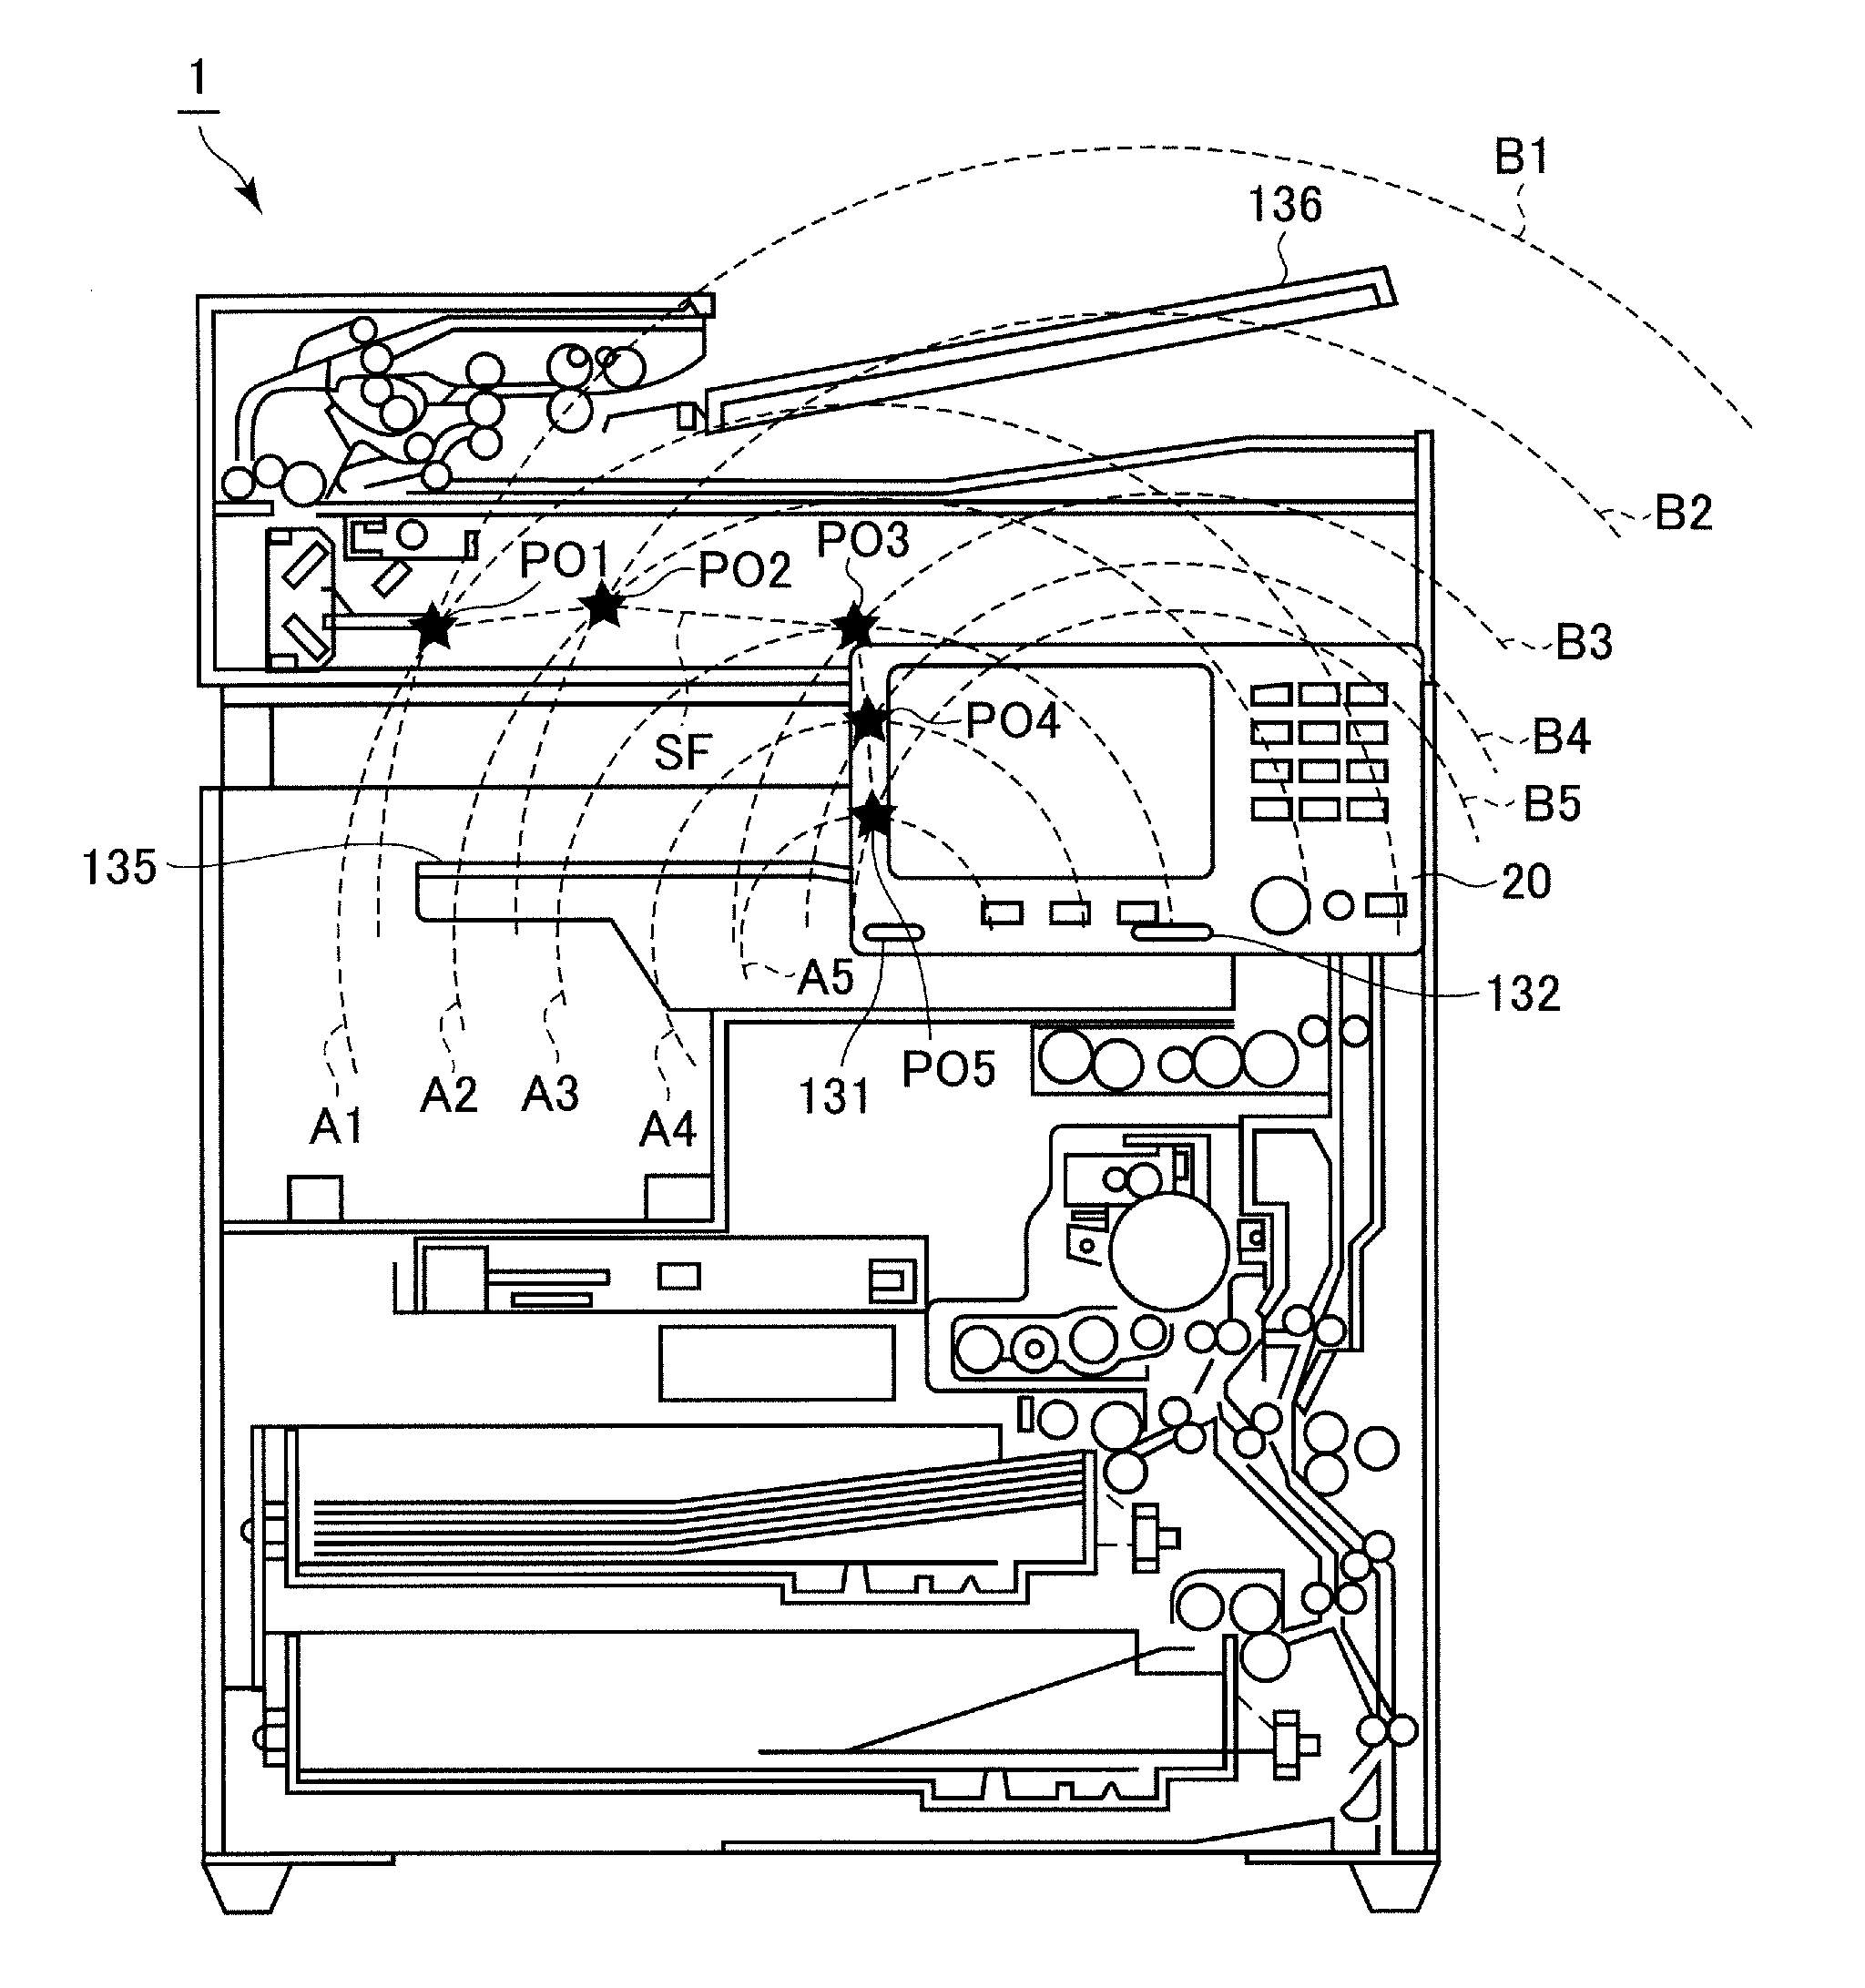 Image forming apparatus capable of changing operating state